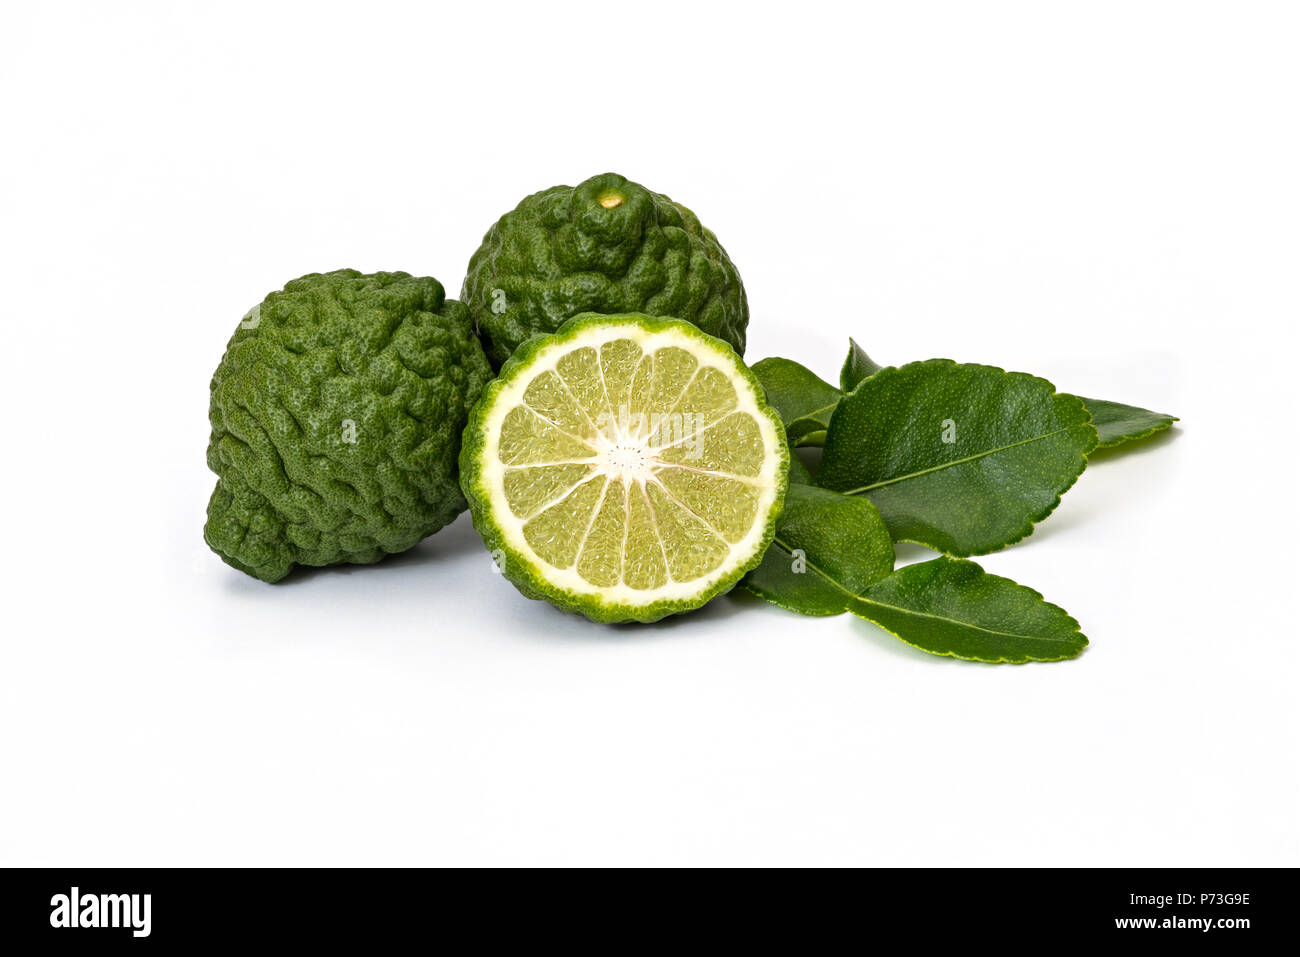 Bergamot fruit kaffir limes and green leaves for herbal products on a white background Stock Photo